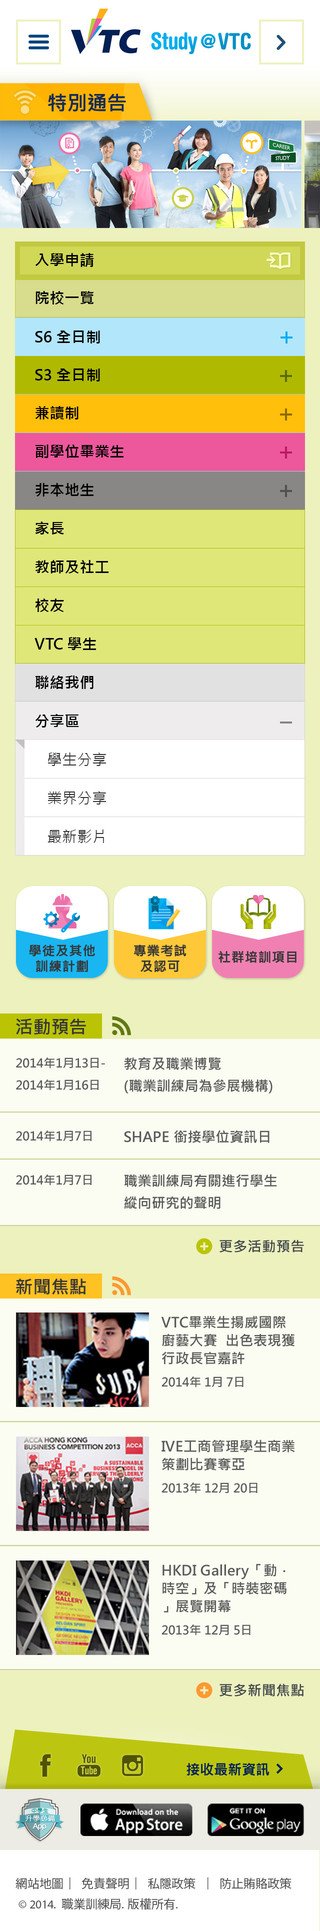 Vocational Training Council website screenshot for mobile version 1 of 6